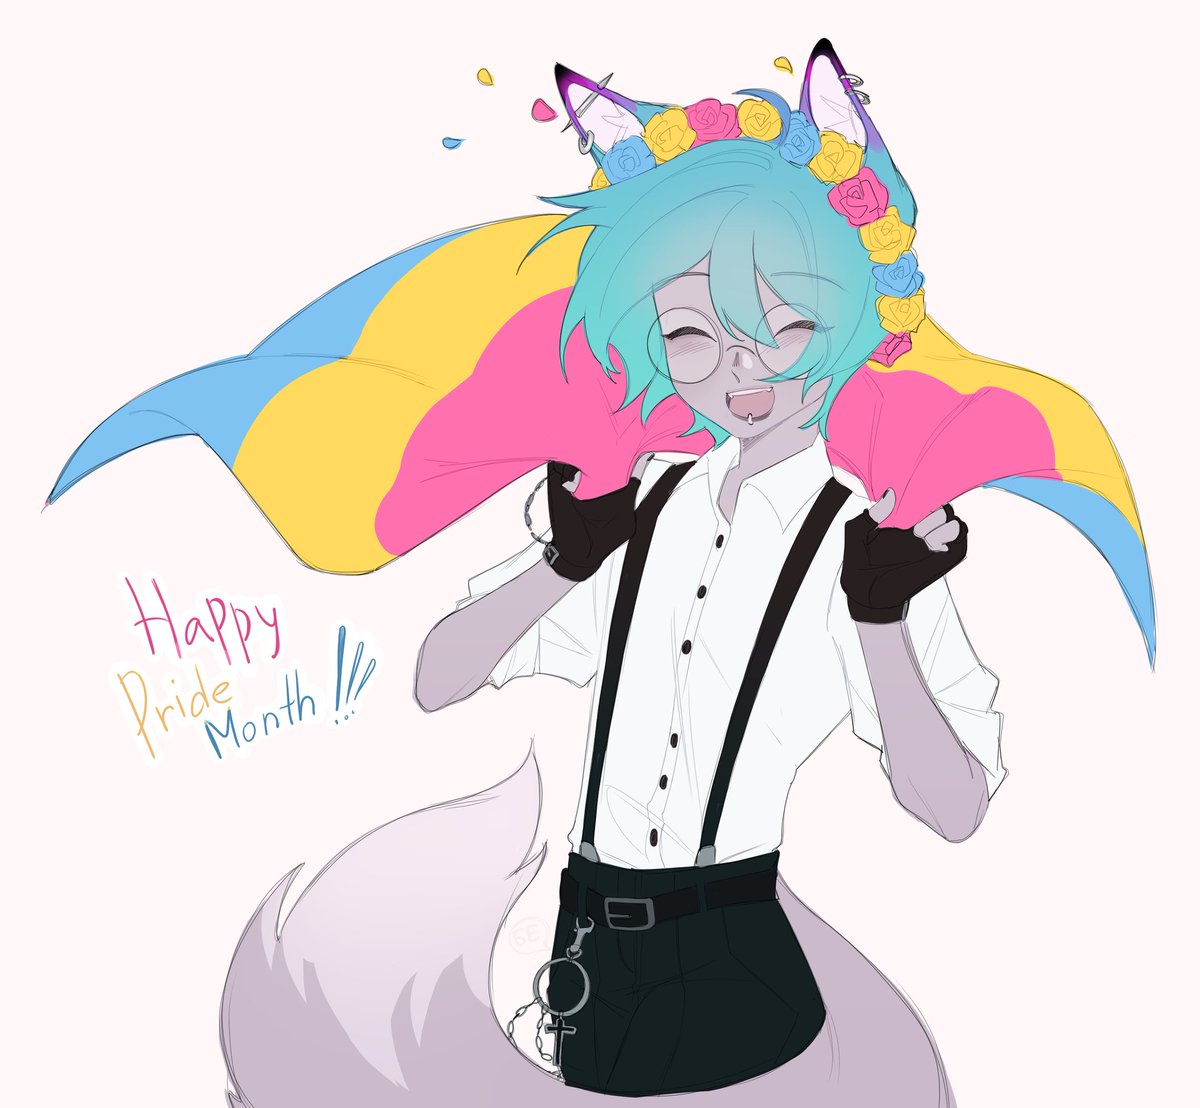 HAPPY #PRIDEMONTH EVERYONE! 💙💛💖
It's a time to be proud of your true self! 

This beautiful artwork of Olaf was drawn by @leshnadne. Thank you soo much for drawing me! 🥺💕

#pride #pansexual #panpride #pansexualpride #lgbt #flag #pansexuality #cute #love #prideflag